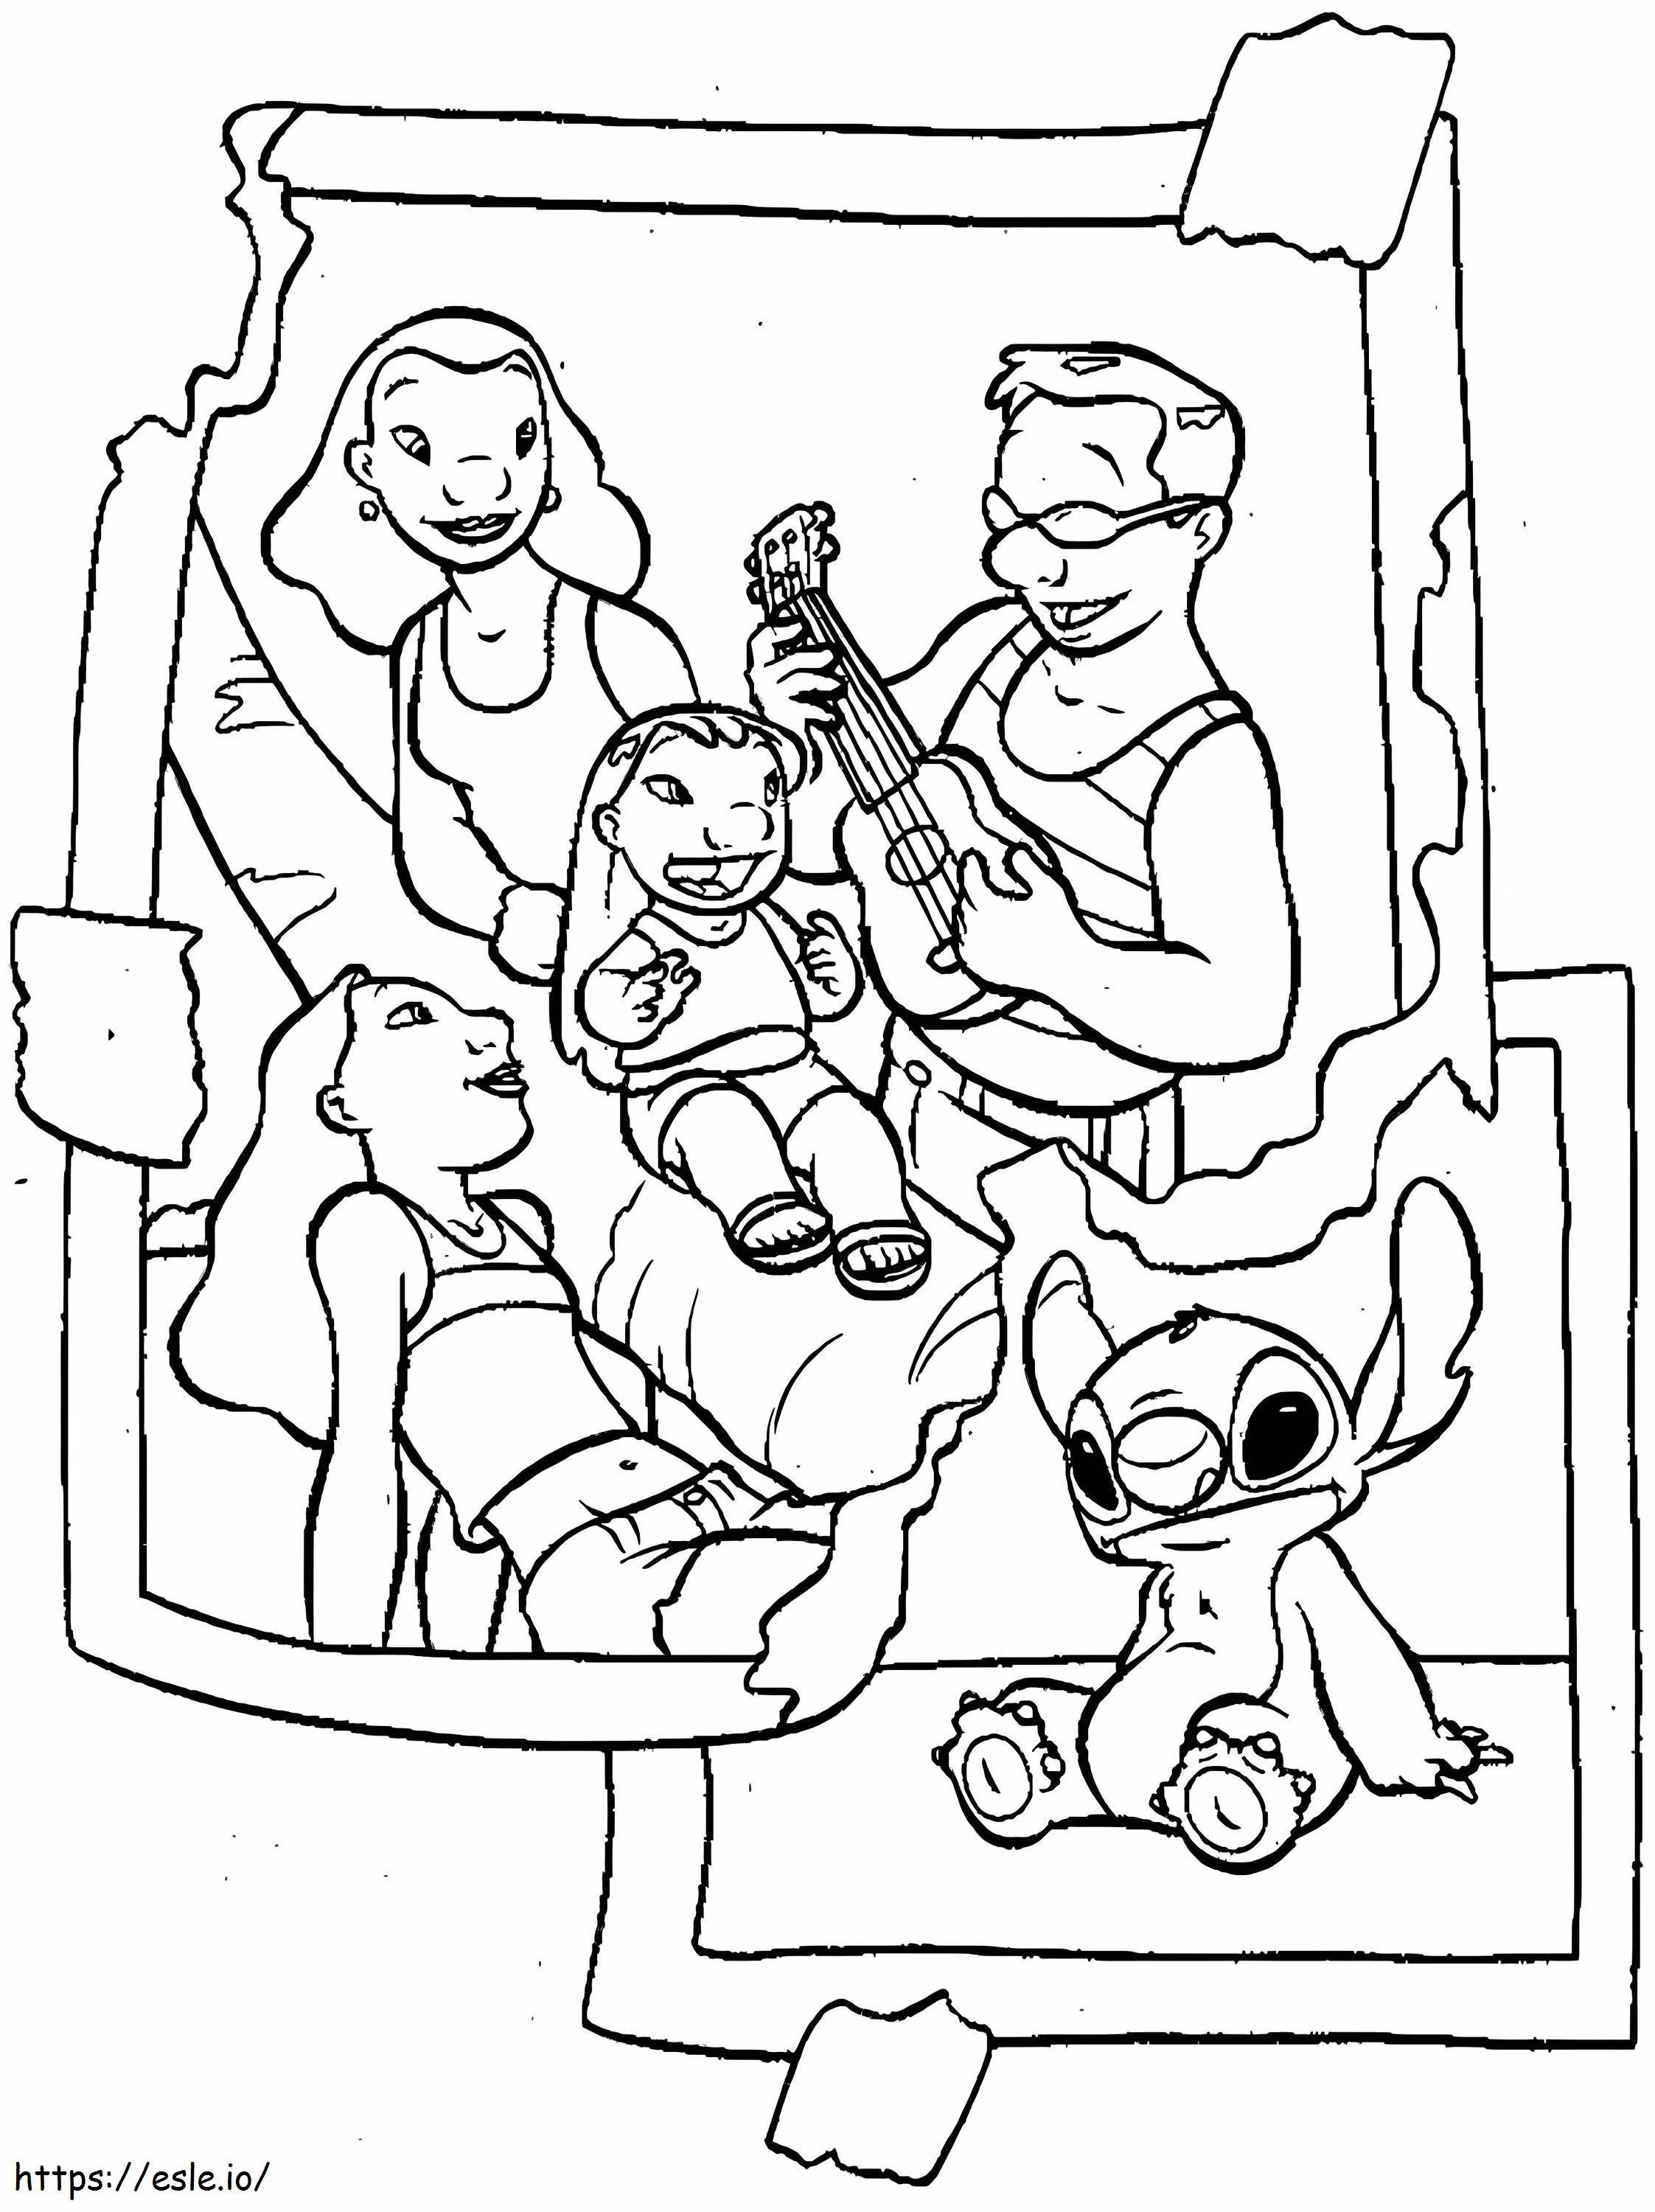 Good Stitch 2 coloring page